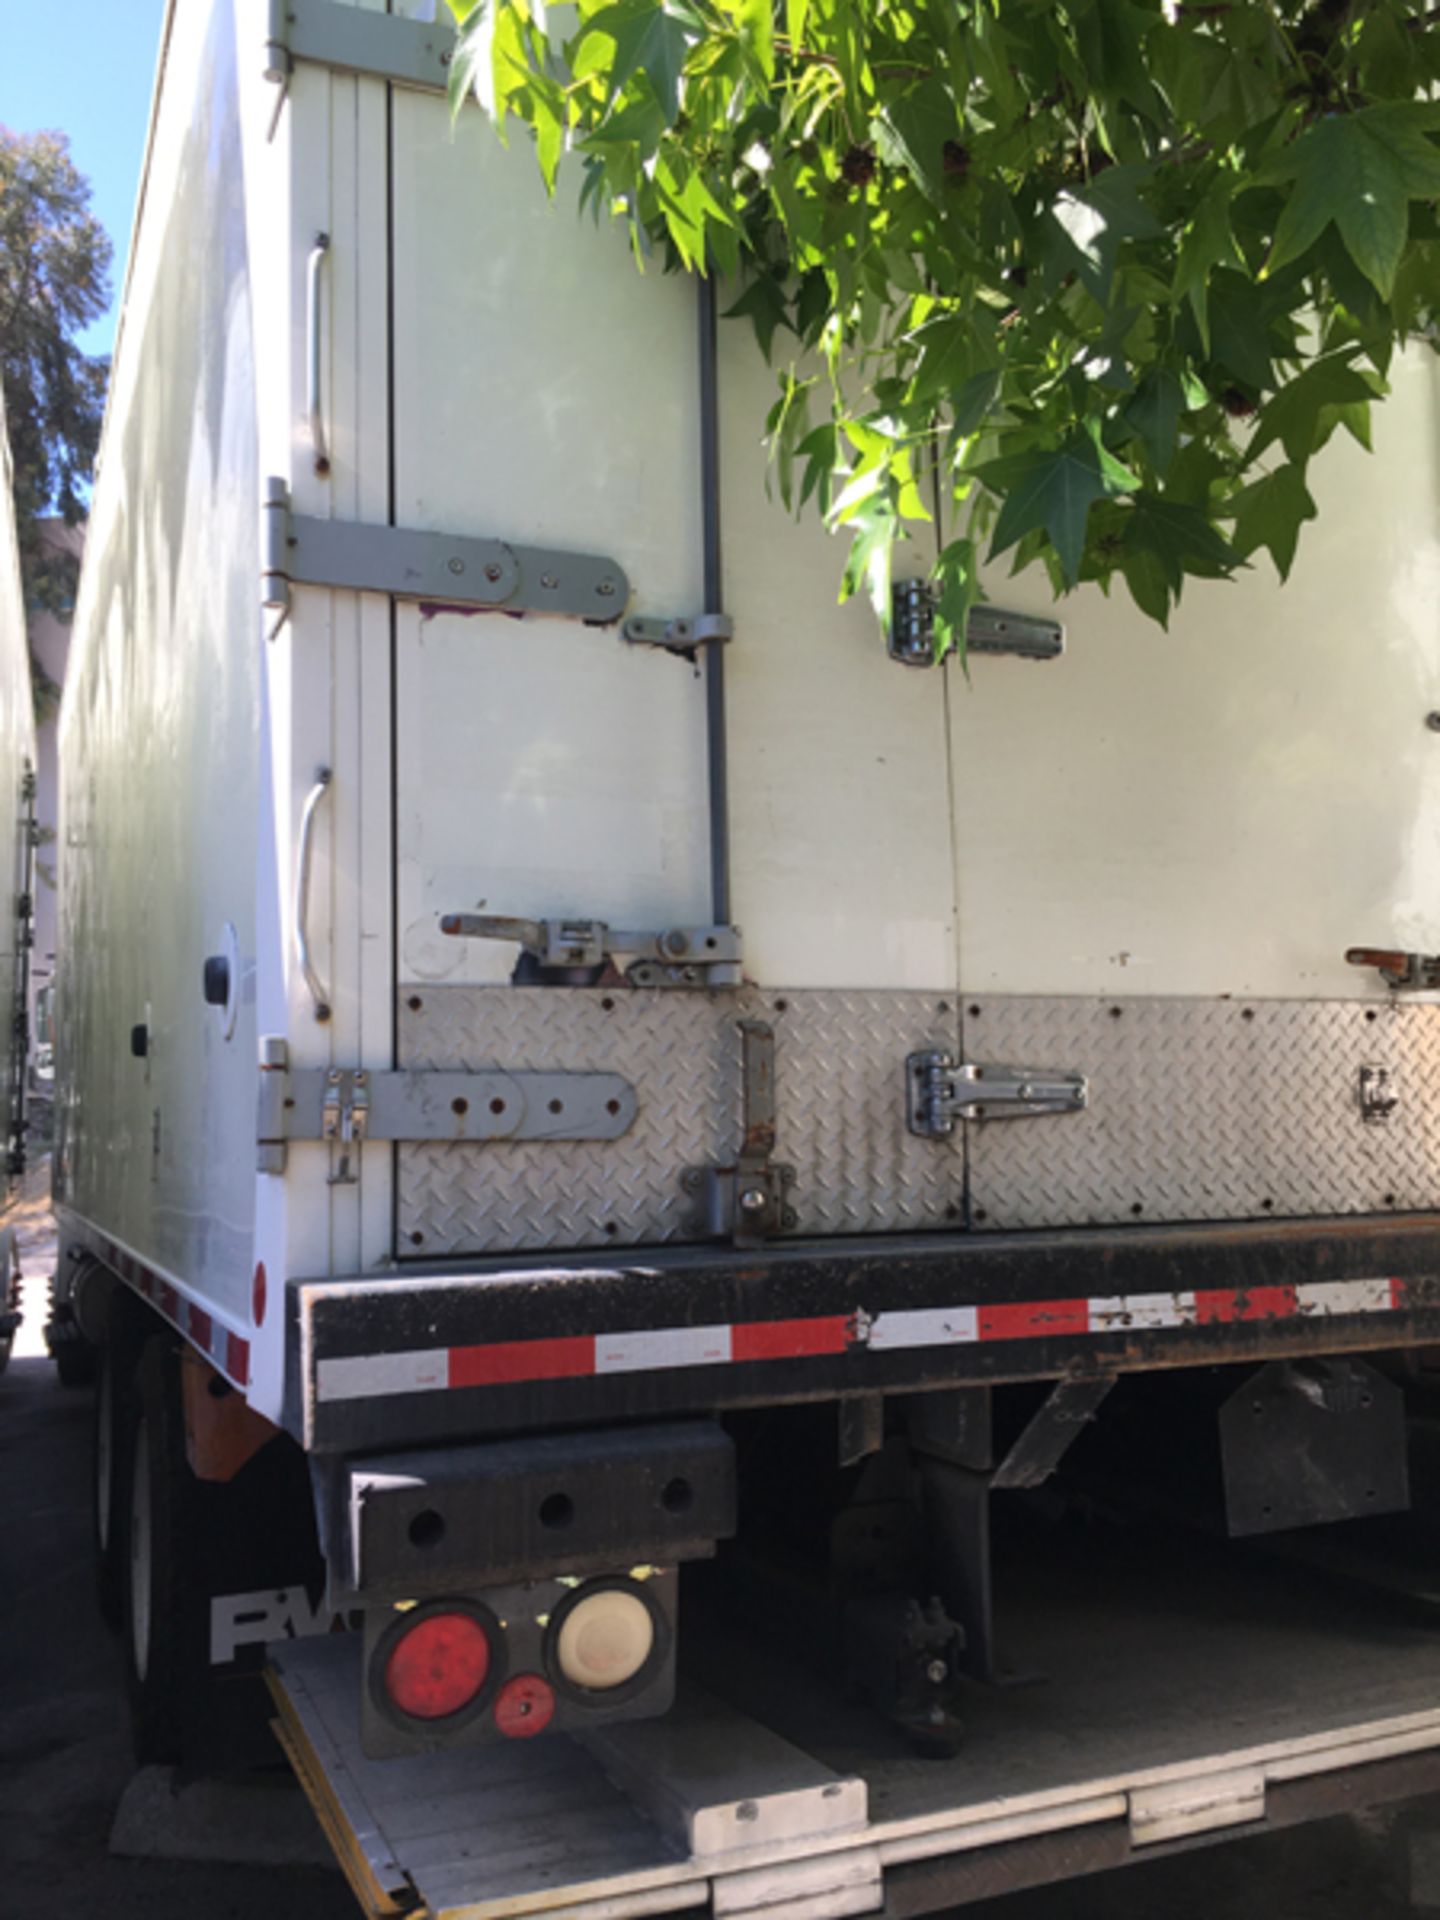 2018 INTERNATIONAL 4400 SBA 6X4 REFRIGERATED BOX TRUCK VIN#: 1HTMSTAR1JH529960, Approx Miles: 53120, - Image 6 of 8